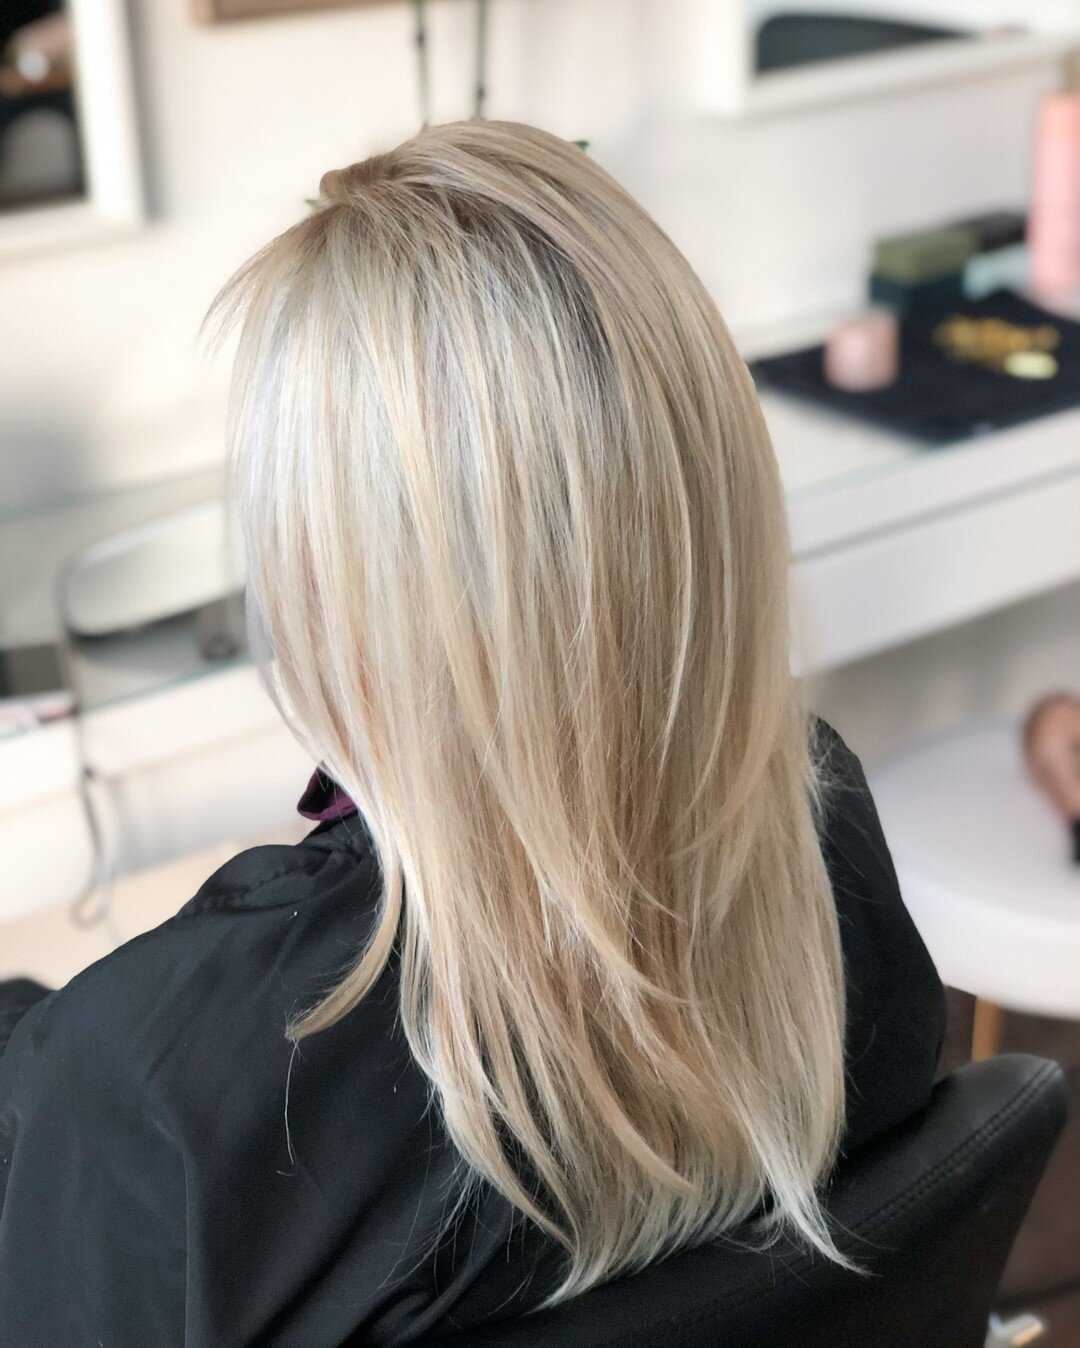 Do you ever wonder what the benefits of dimensional color are? ✨⠀⠀⠀⠀⠀⠀⠀⠀⠀
⠀⠀⠀⠀⠀⠀⠀⠀⠀
✨It creates an optical effect that makes your hair look thicker ⠀⠀⠀⠀⠀⠀⠀⠀⠀
✨Enhances your natural hair color without completely changing it⠀⠀⠀⠀⠀⠀⠀⠀⠀
✨Makes your hair l